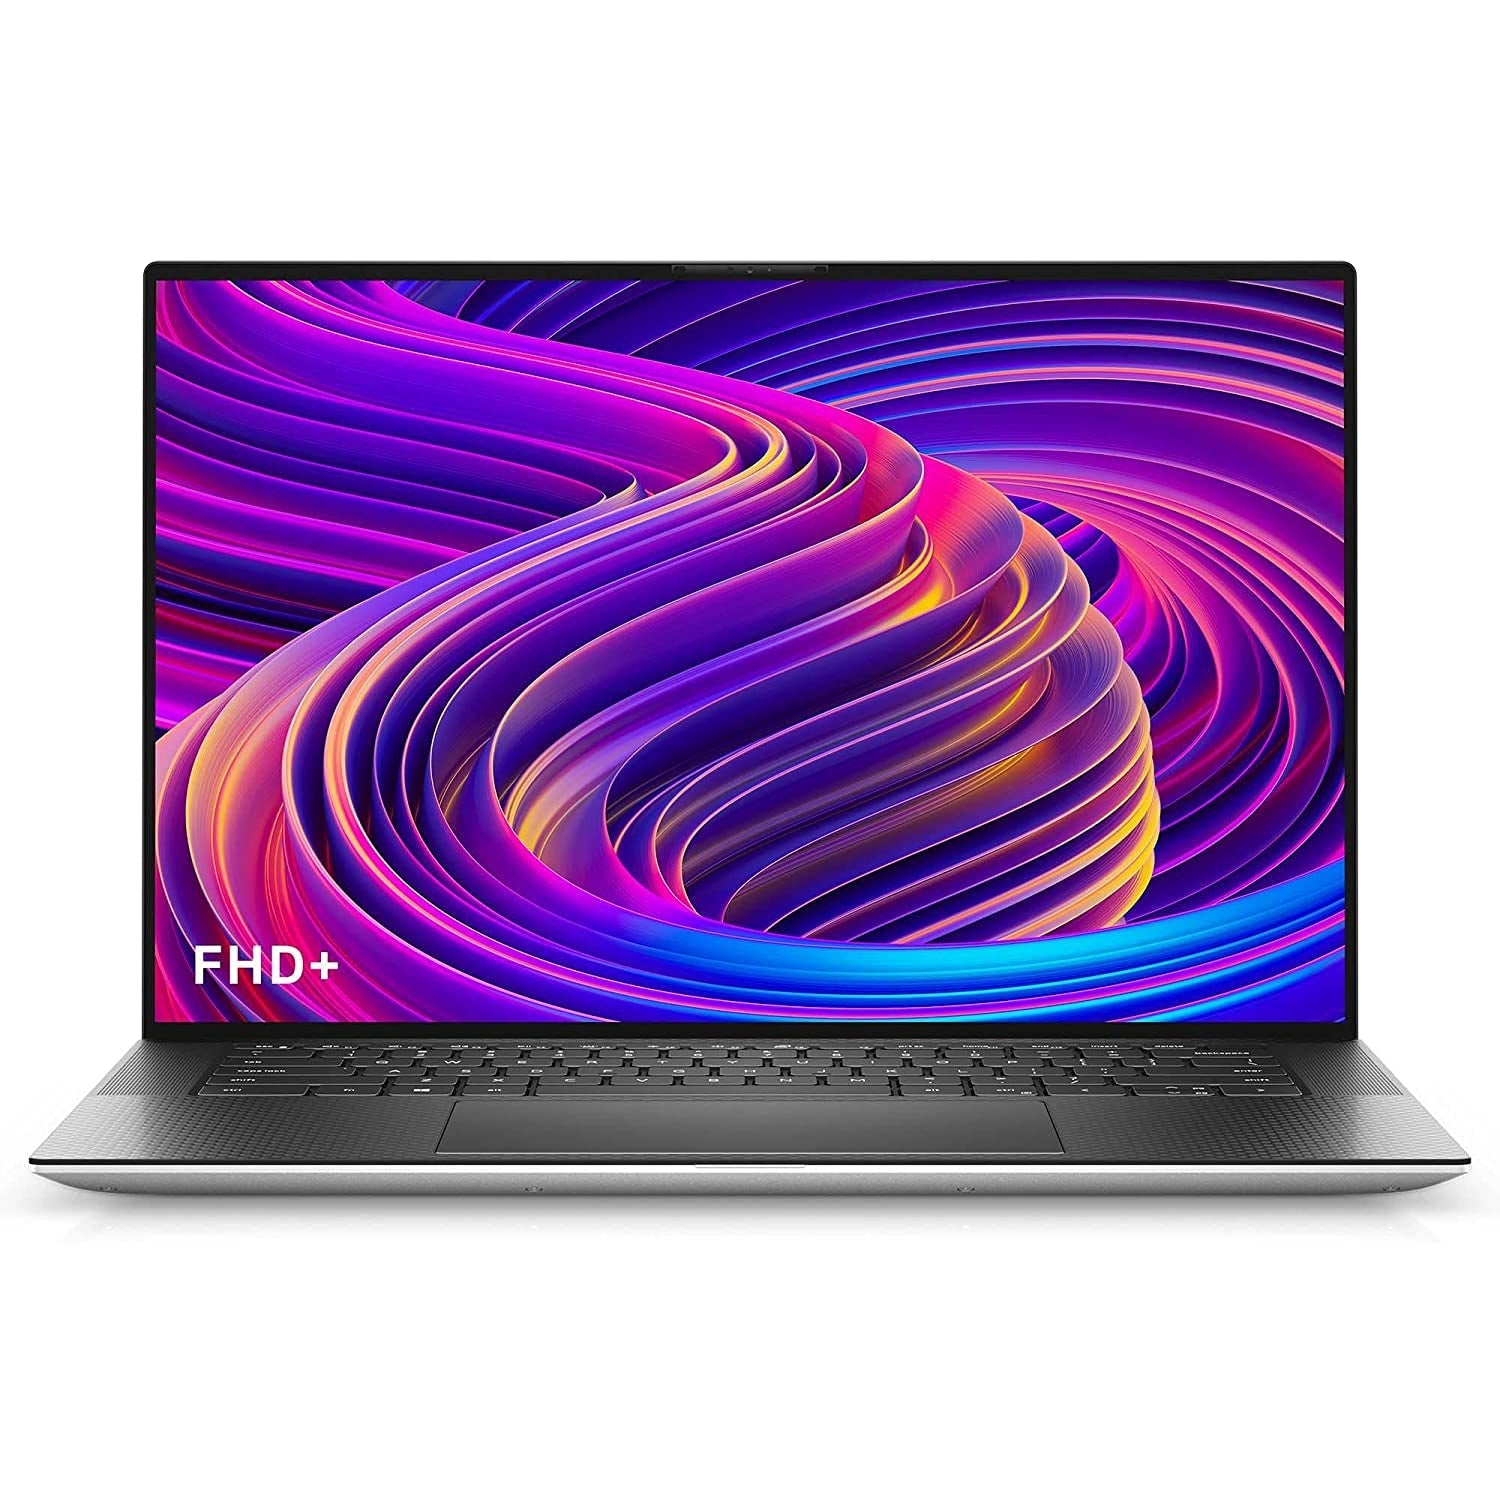 Dell XPS 15 9510 15.6" Laptop, Intel Core i7-11800H, 16GB RAM, 512GB SSD, Silver - Refurbished Excellent